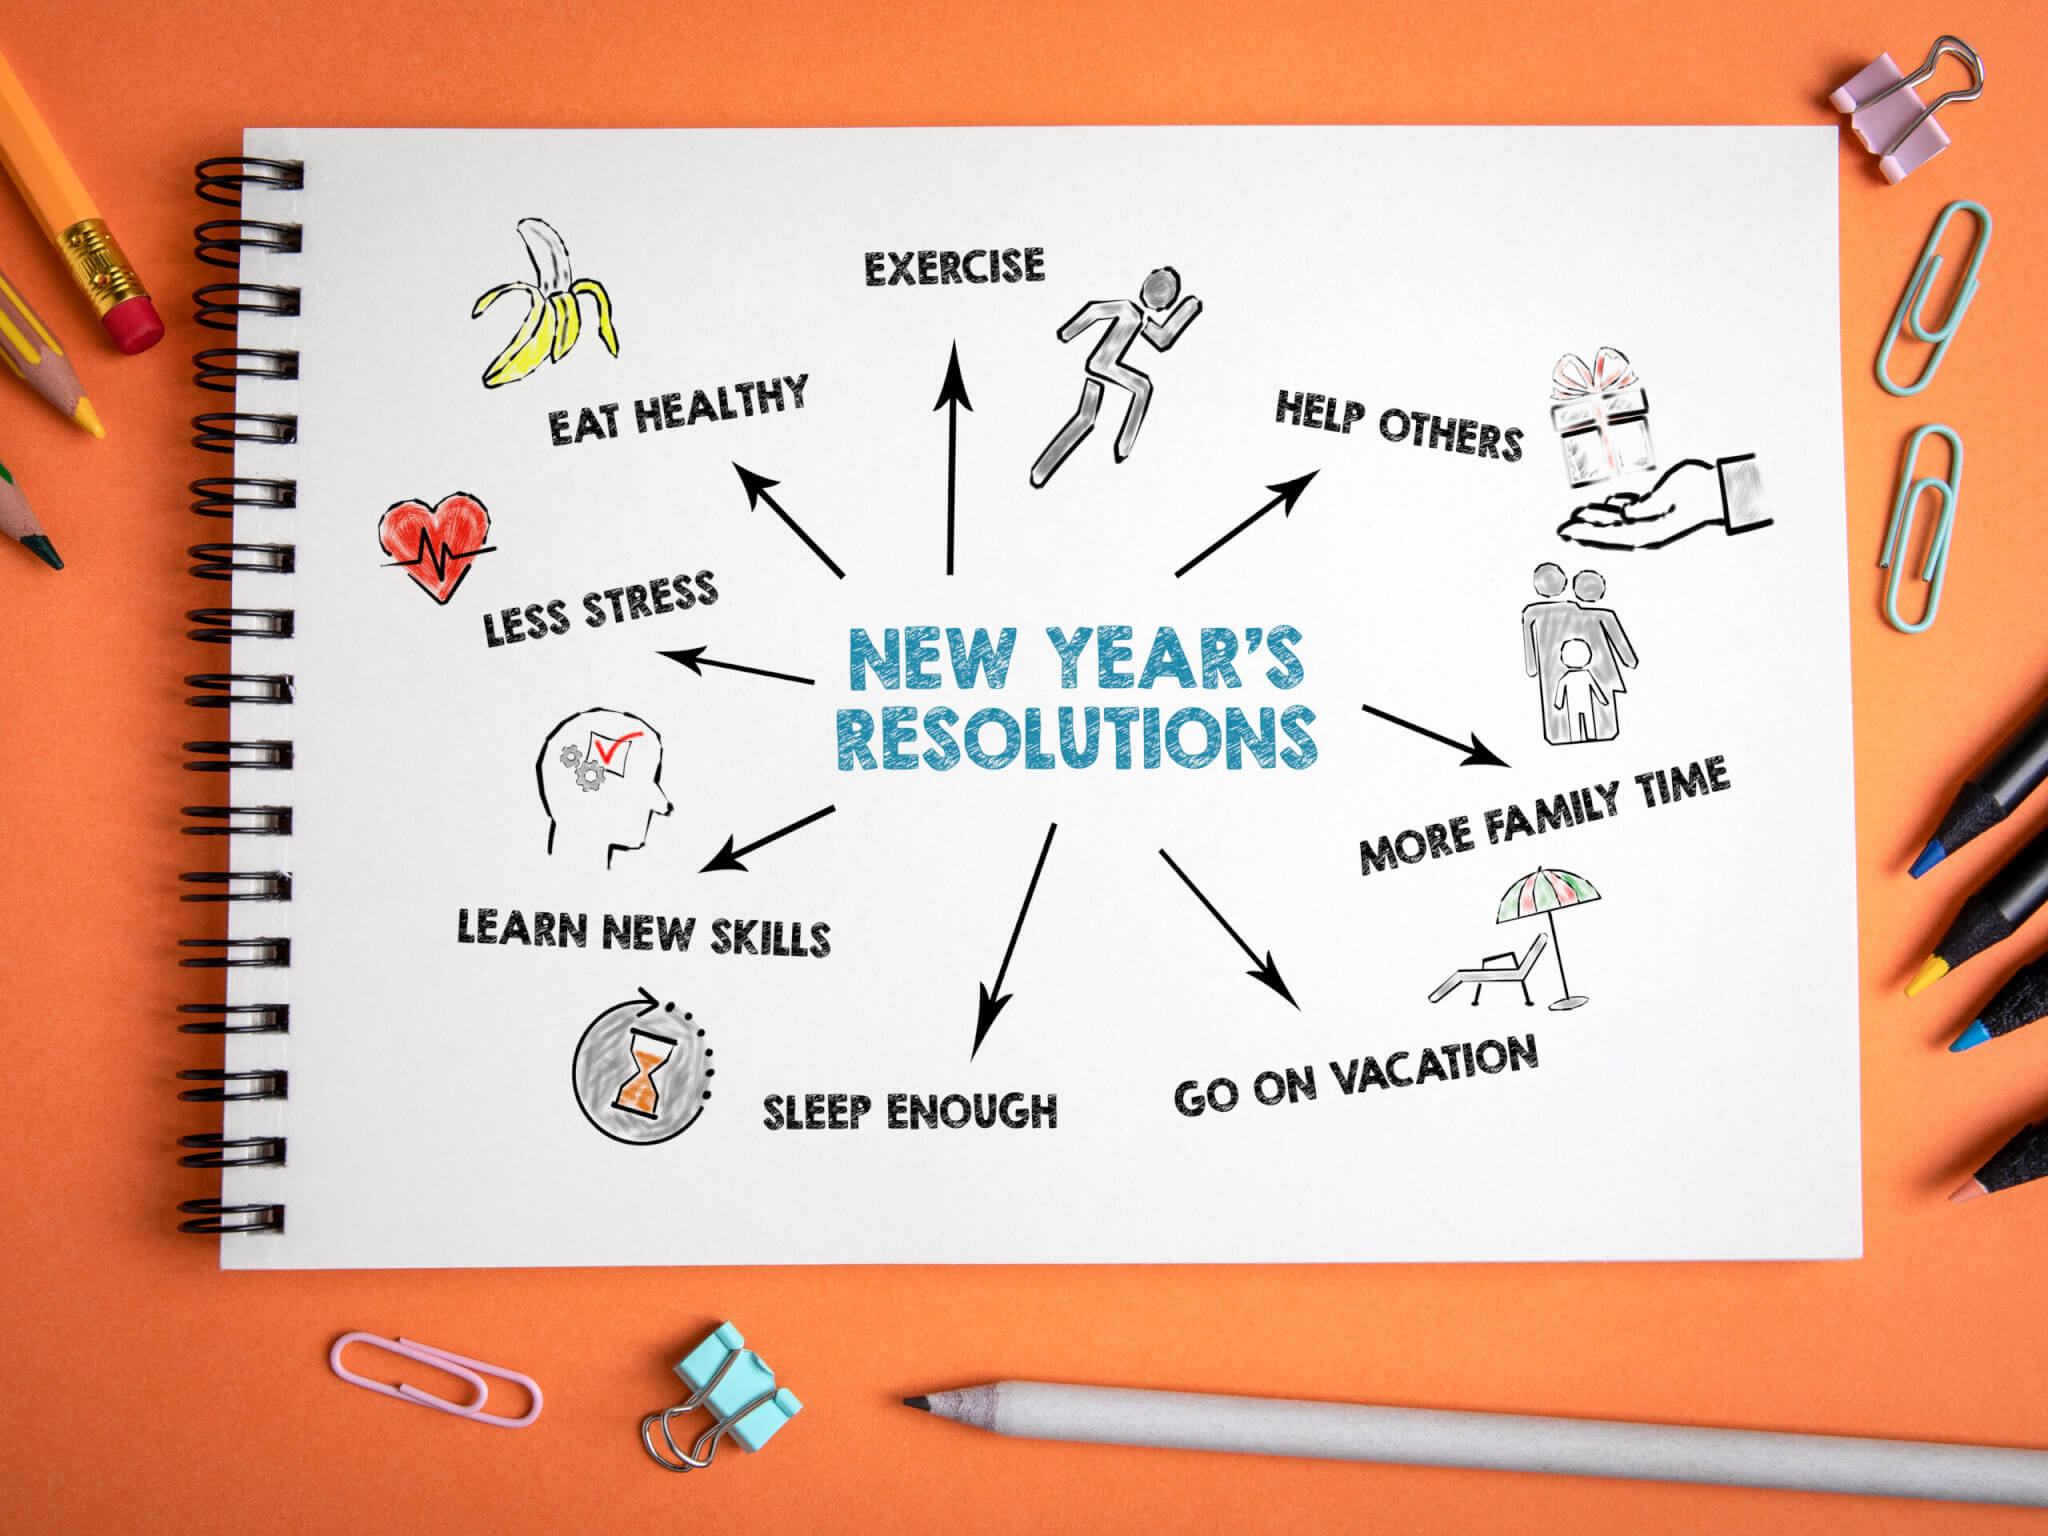 New Year's resolutions drawn out on pad